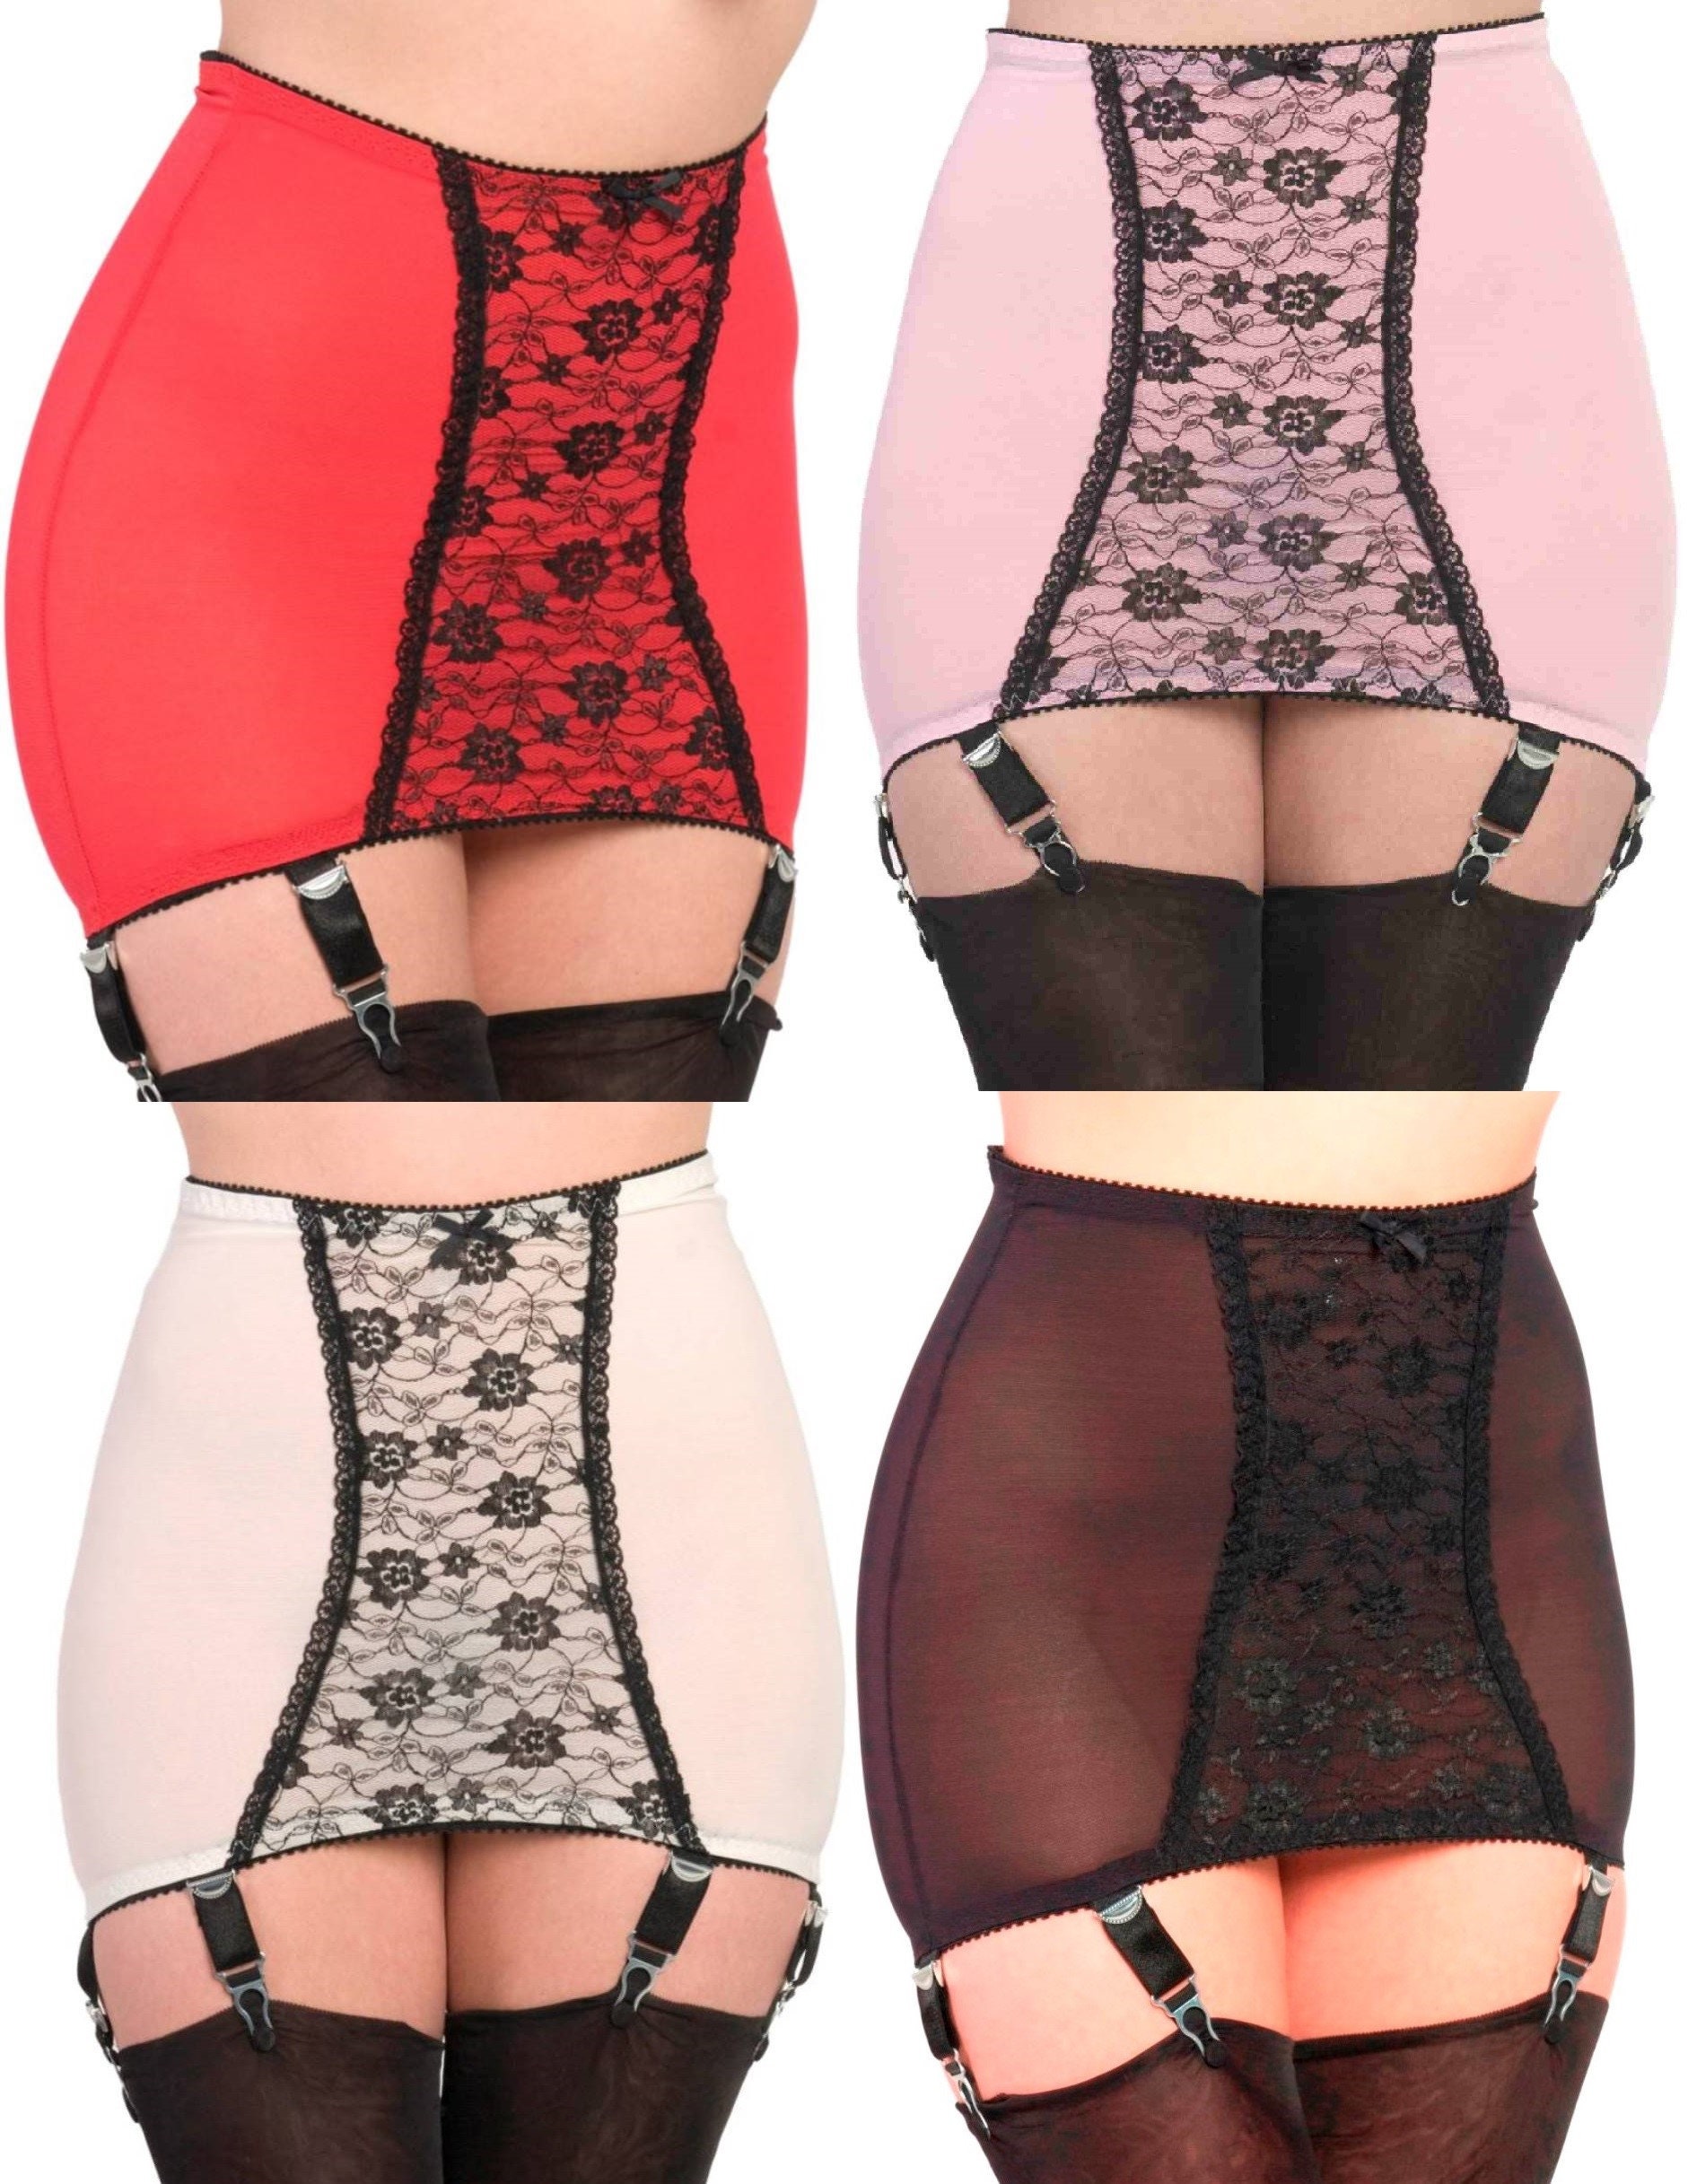 Red Girdle 